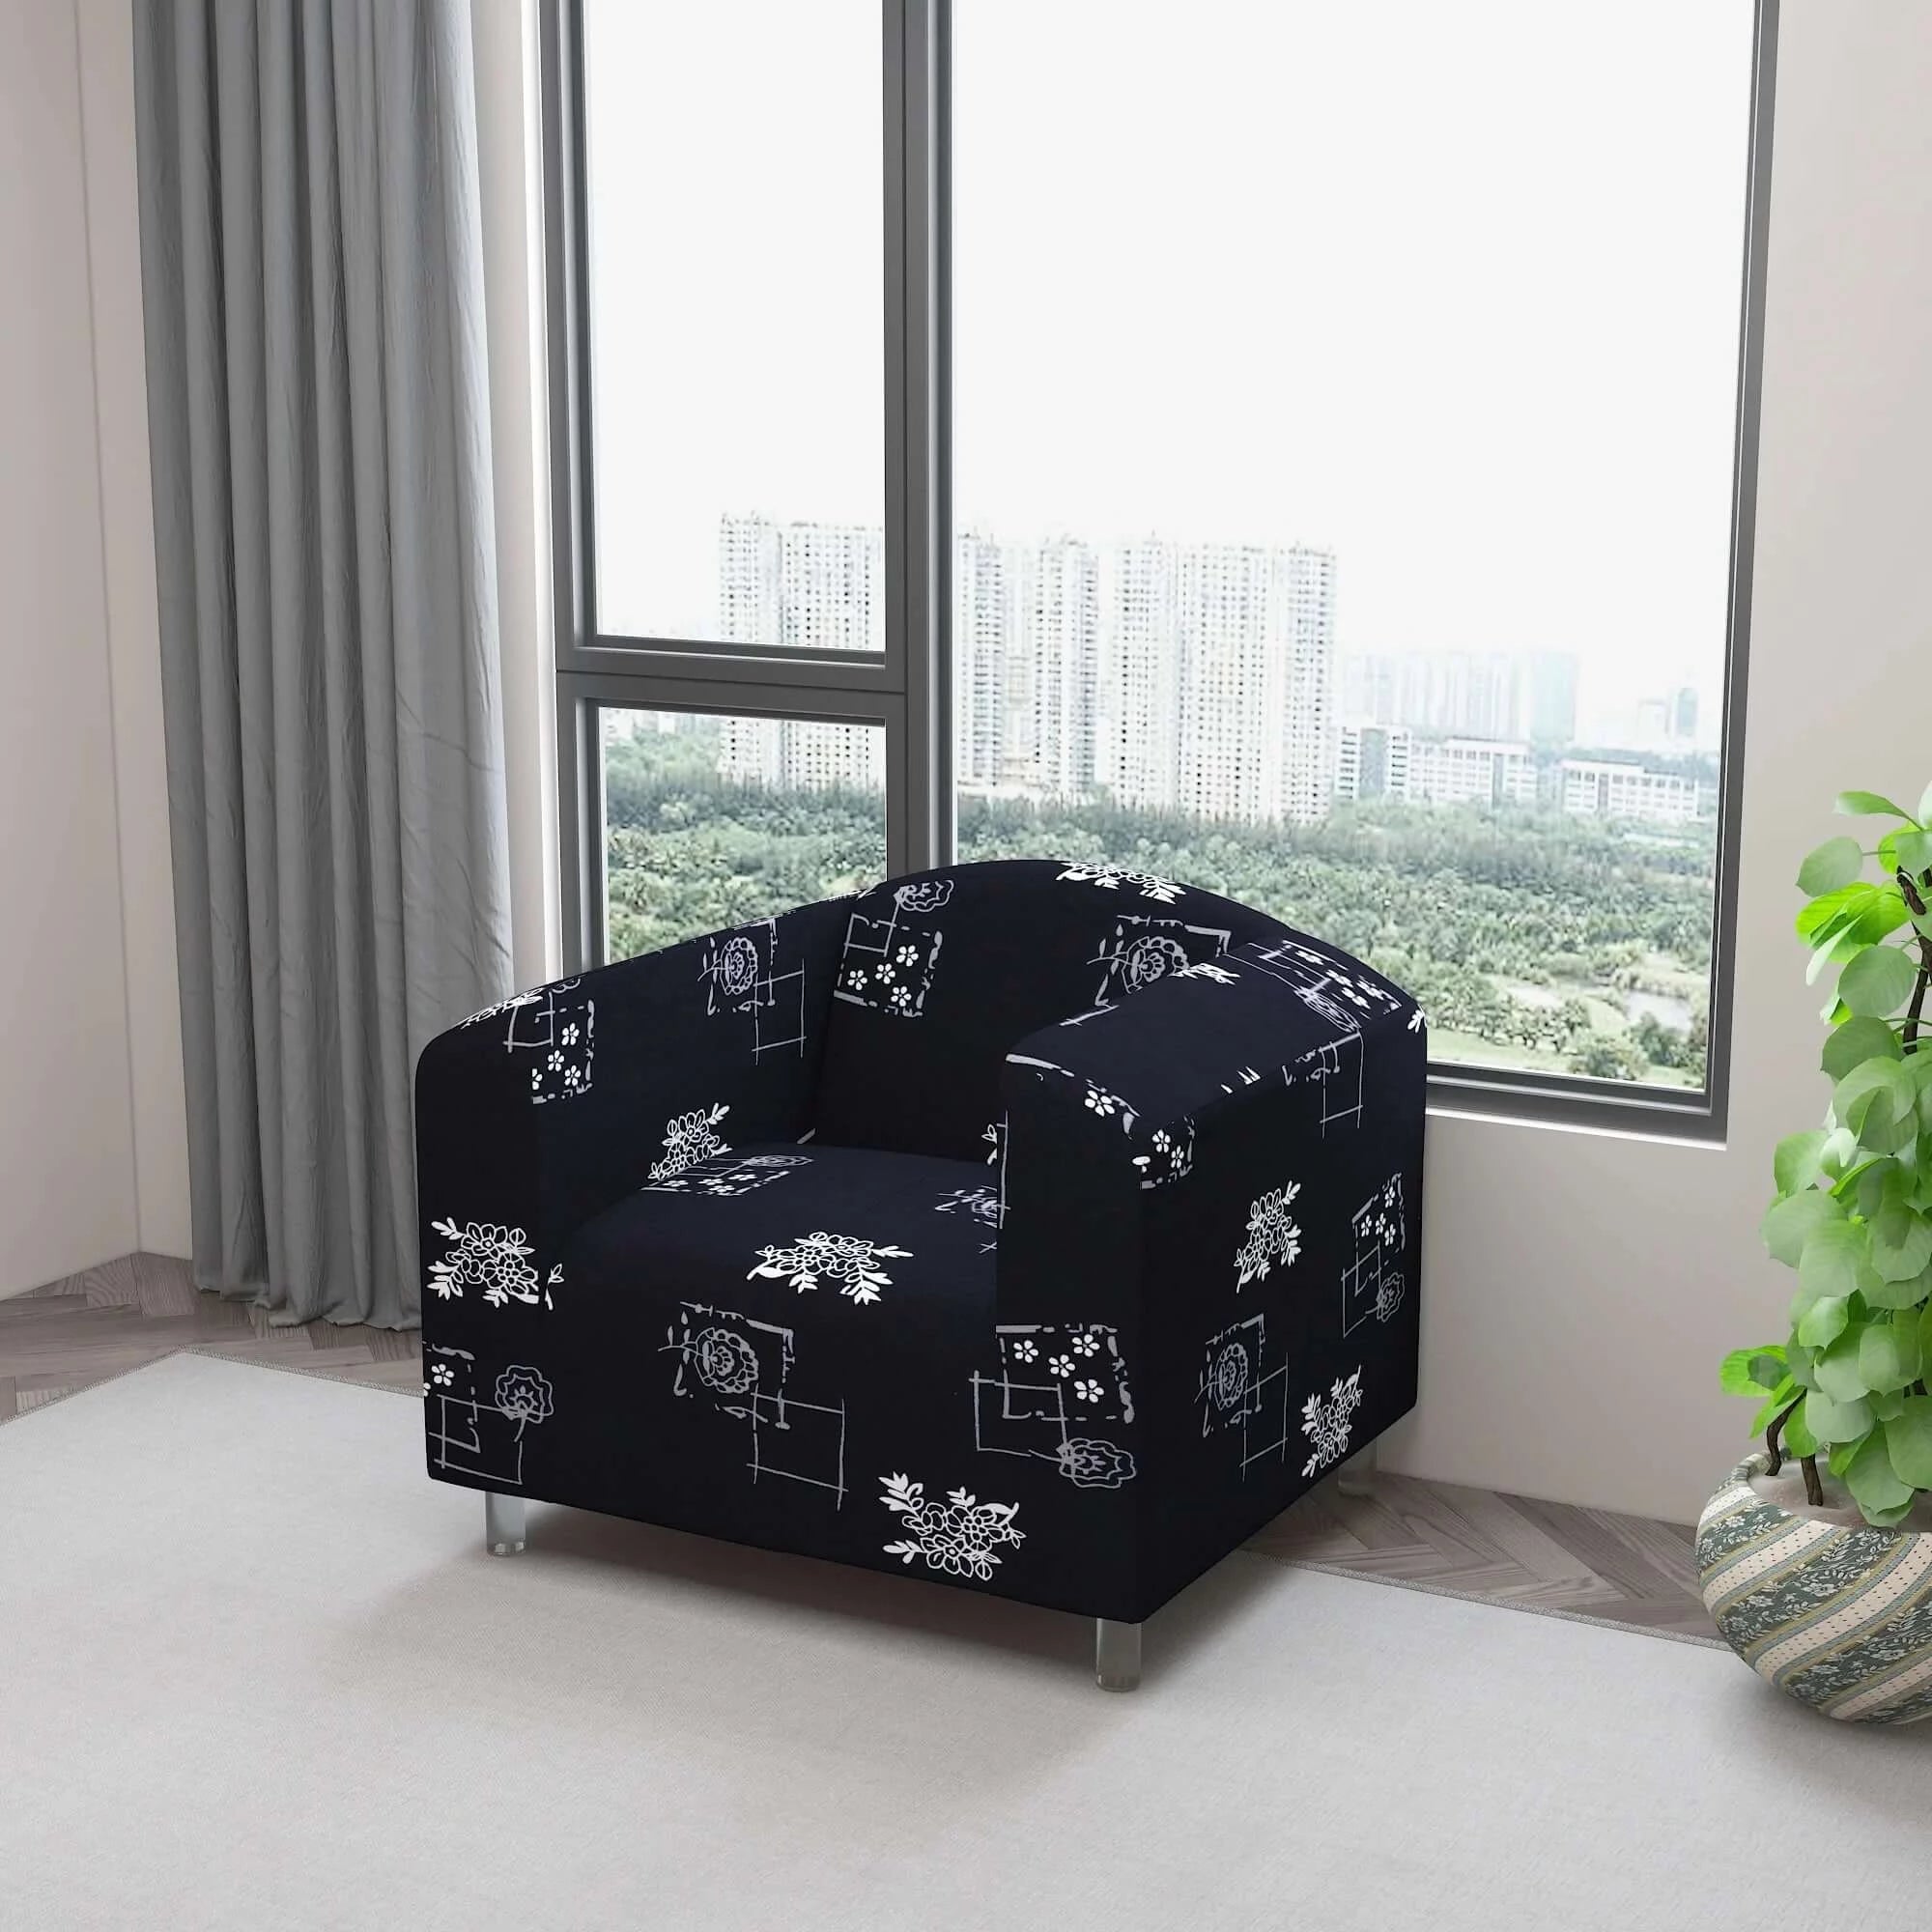 Marigold Printed Sofa Protector Cover Full Stretchable, MG18 - Dream Care Furnishings Private Limited